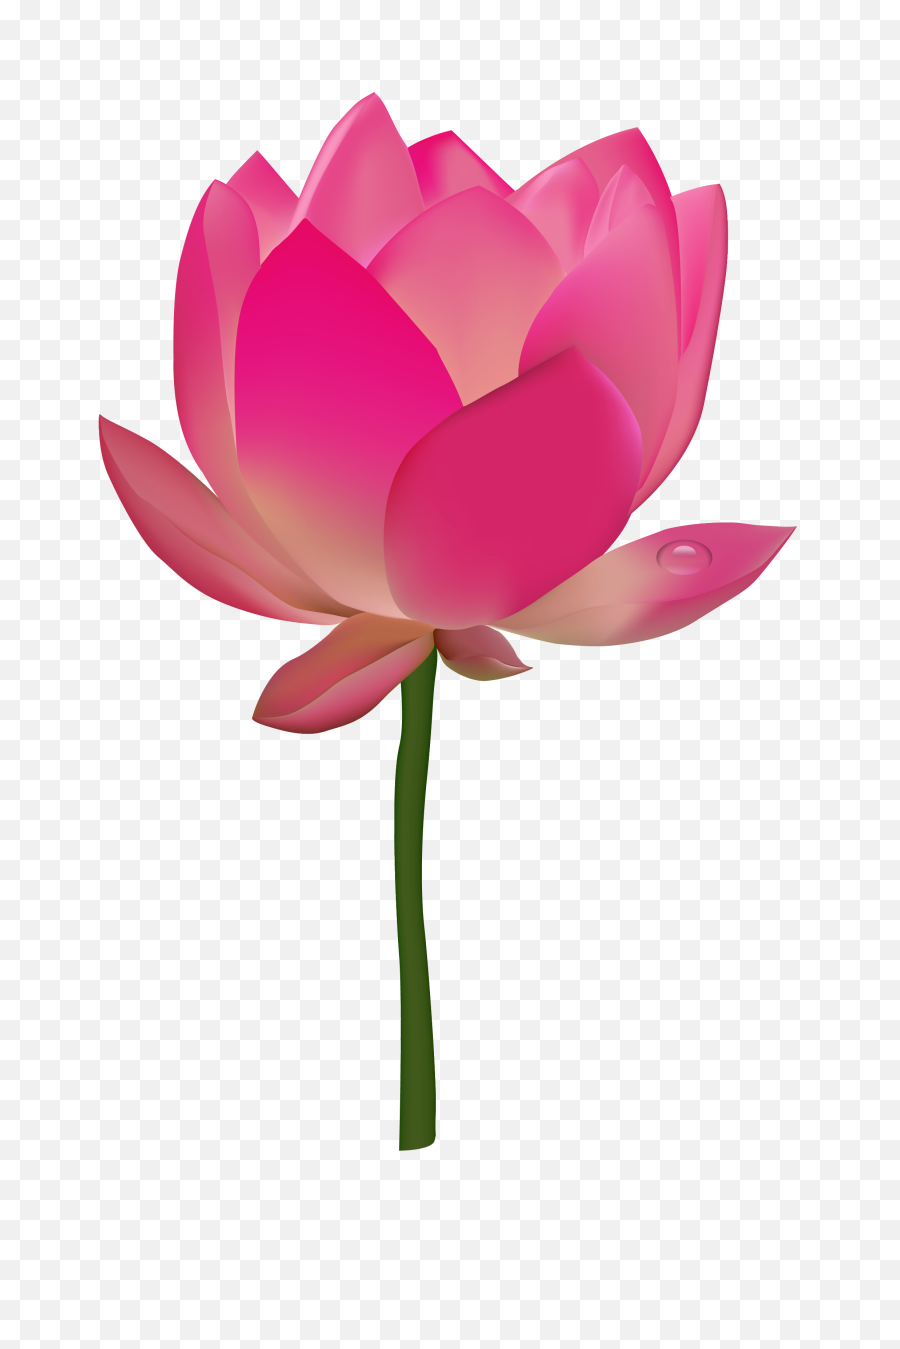 Lotus Flower Png Image - Purepng Free Transparent Cc0 Png Things Starting With L,Flower Stem Png